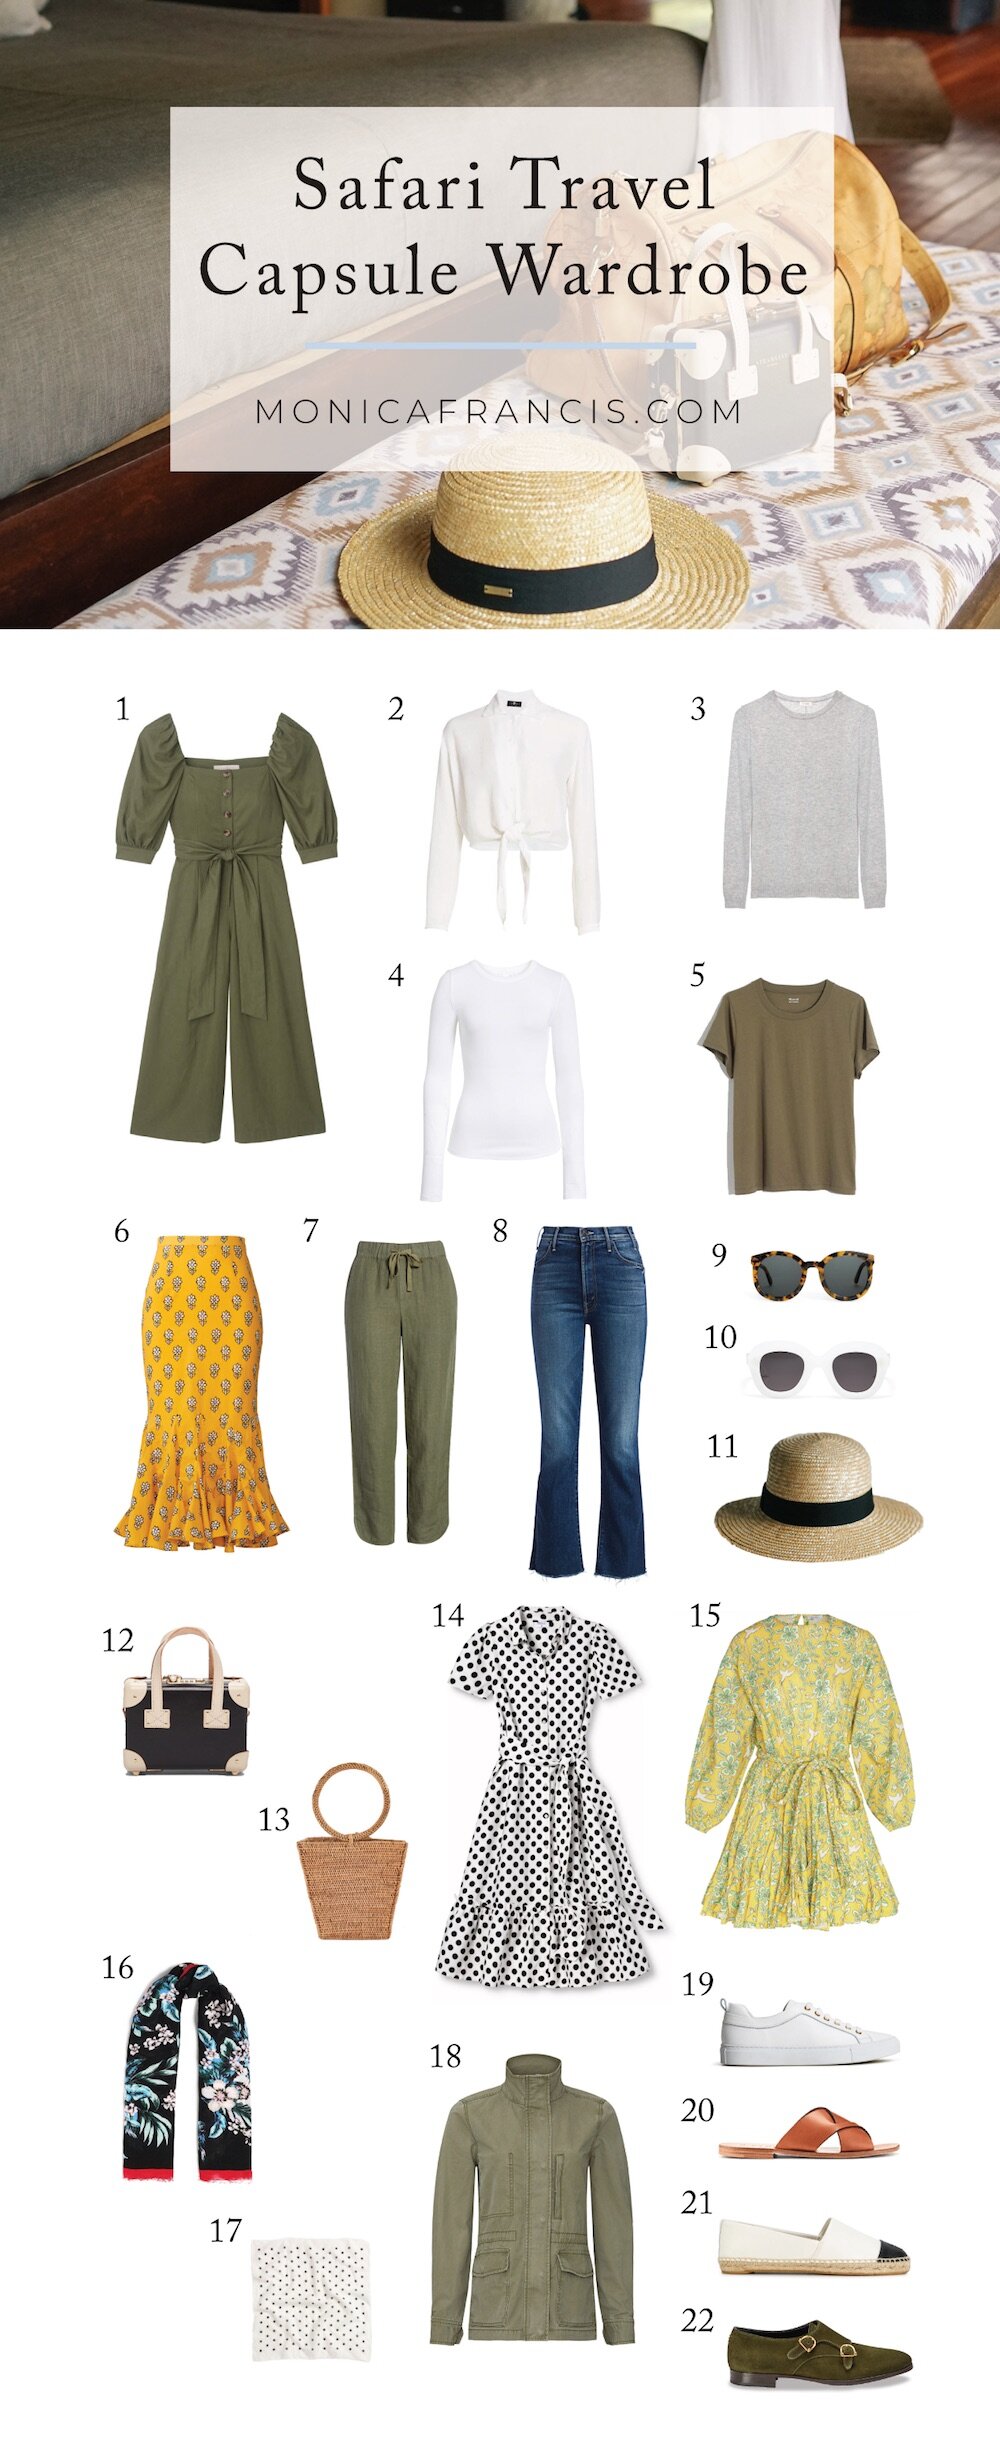 How to Pack Light for Your First Safari | Packing for your first African safari? Use this complete safari packing list to make your own travel capsule wardrobe in style and pack under 15 kg. Get my best tips and tricks for safari travel style, outfi…